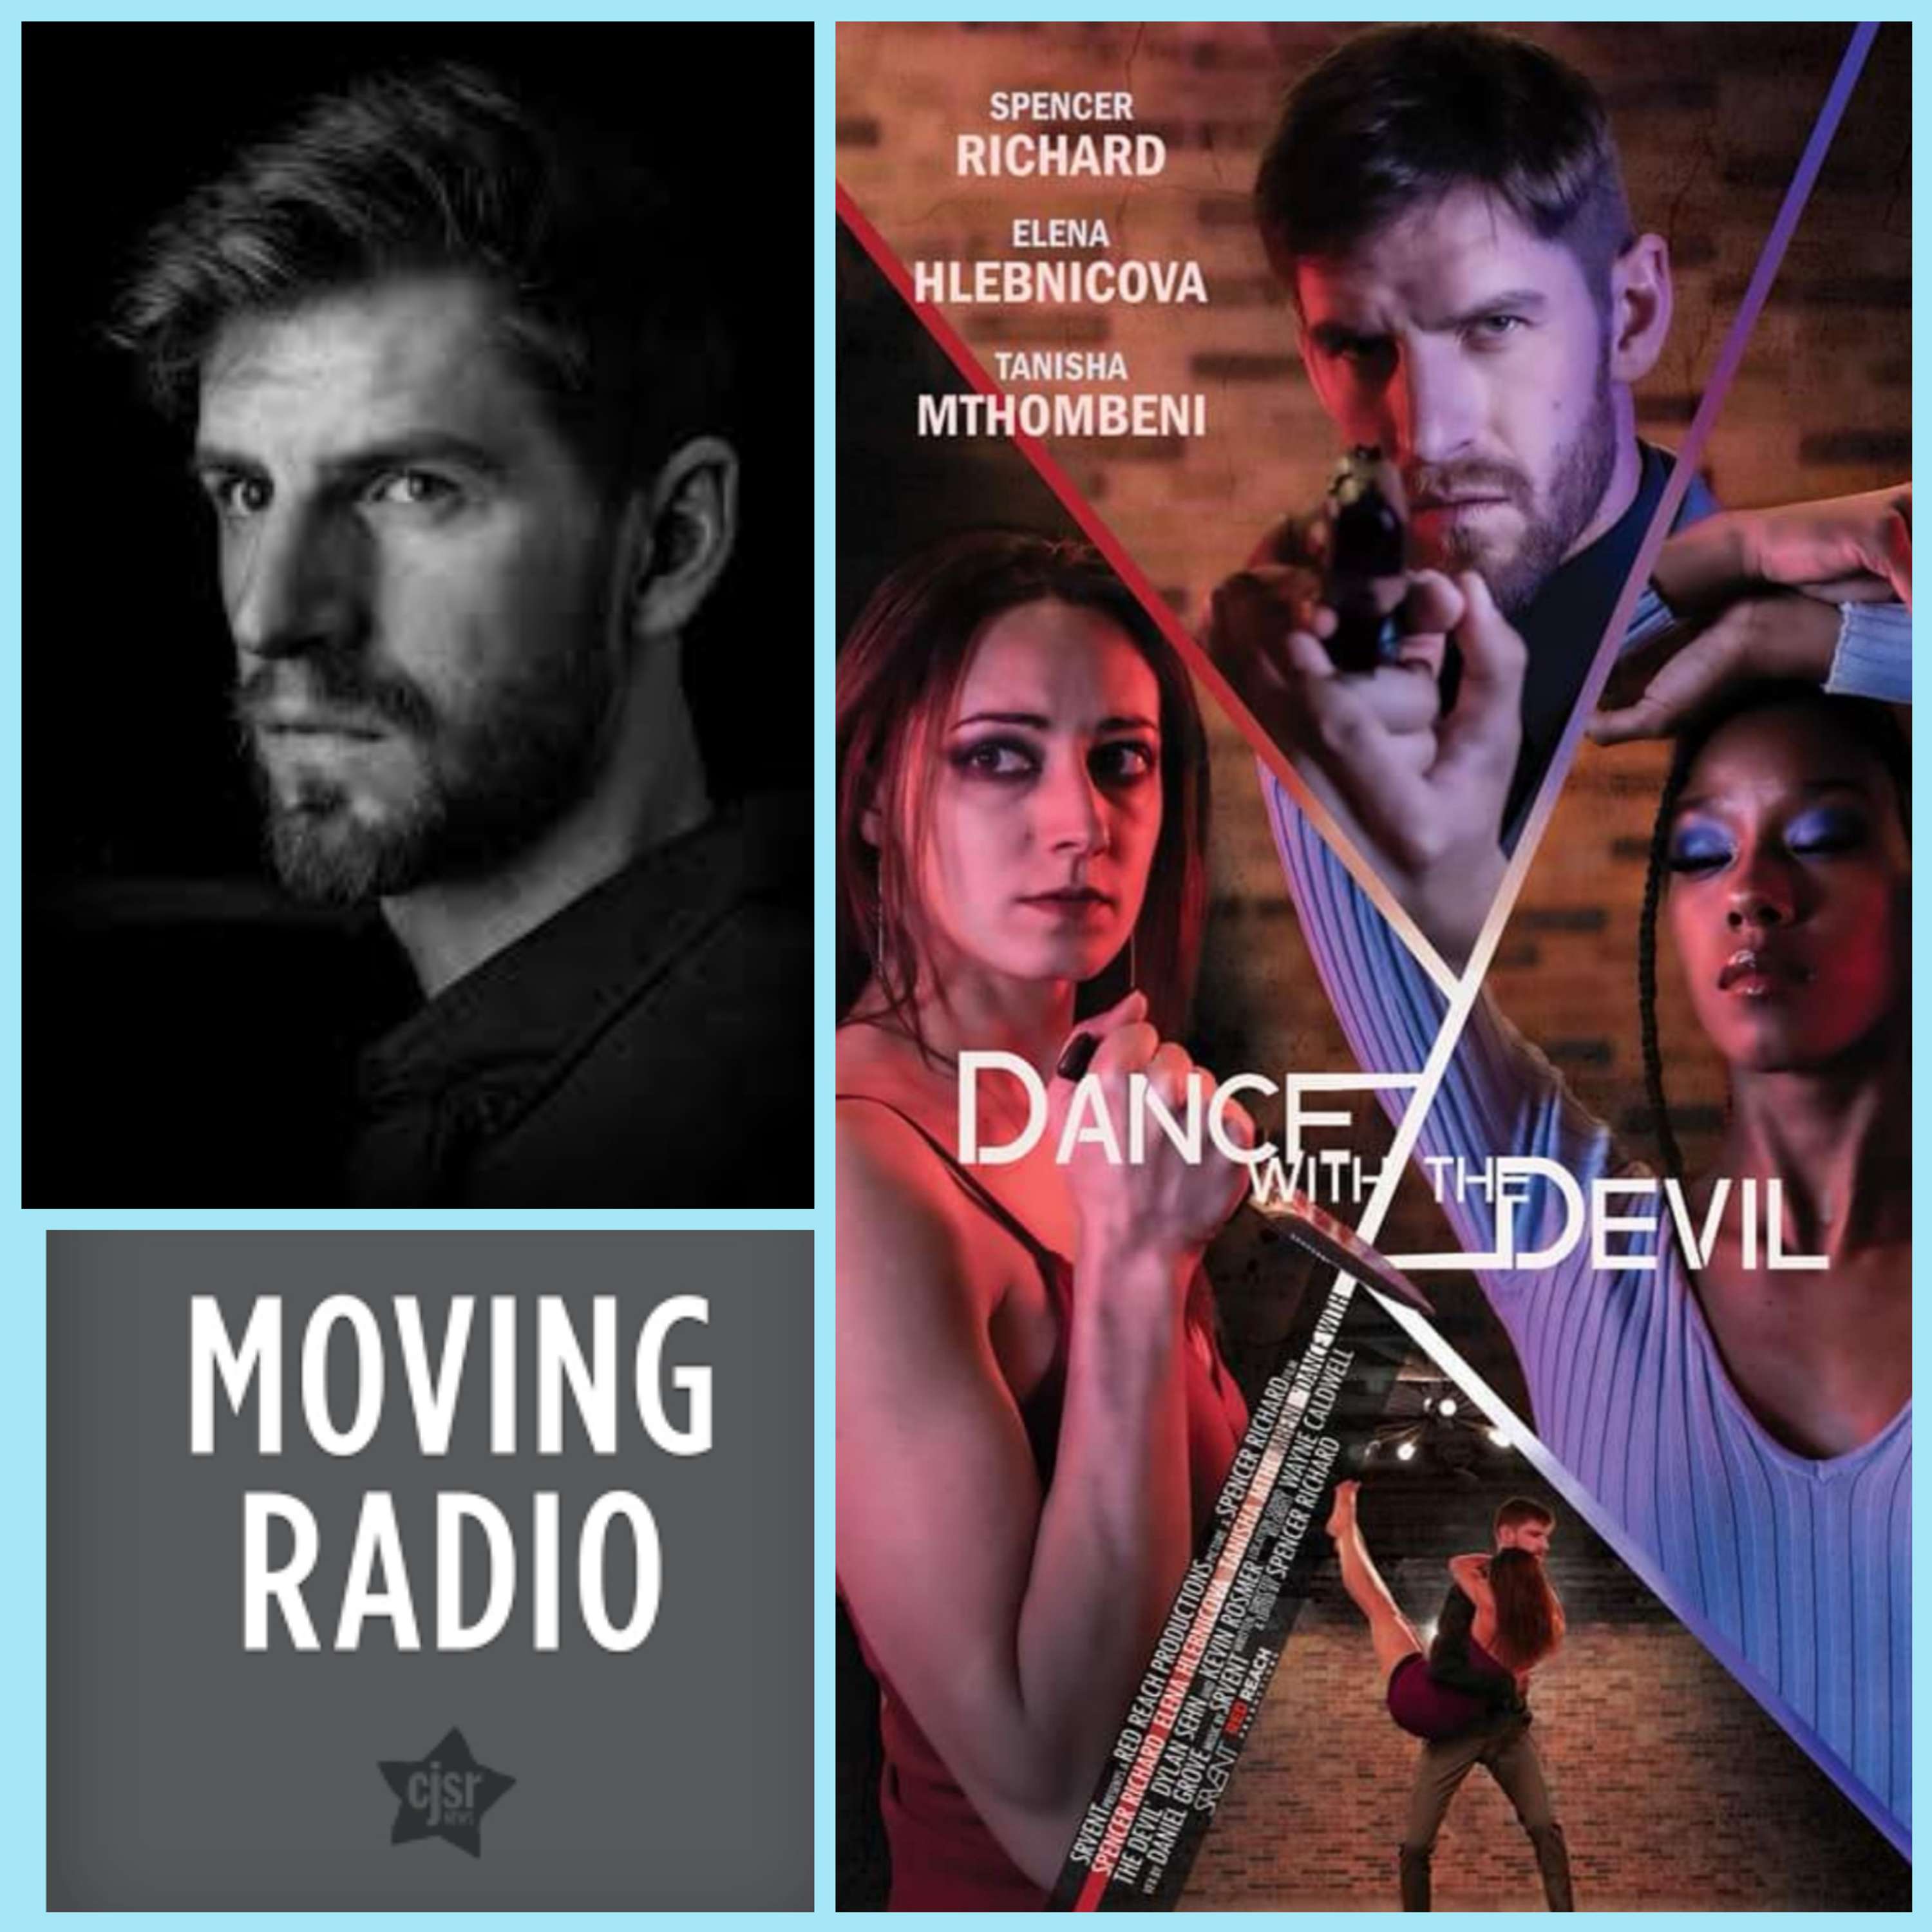 Spencer Richard (SRVENT) Interview - DANCE WITH THE DEVIL